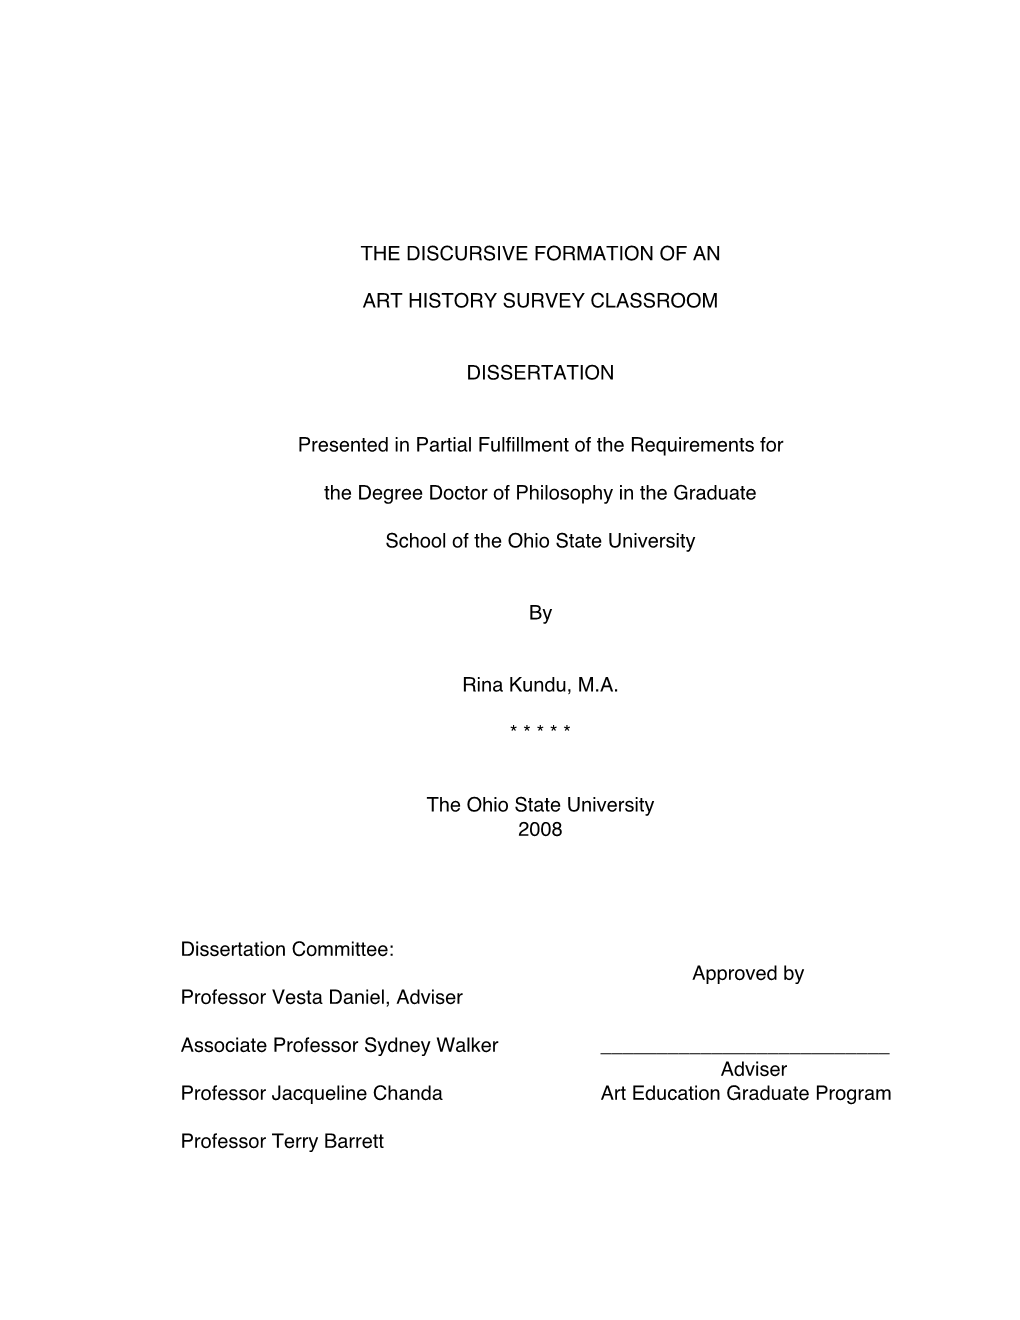 THE DISCURSIVE FORMATION of an ART HISTORY SURVEY CLASSROOM DISSERTATION Presented in Partial Fulfillment of the Requirements Fo